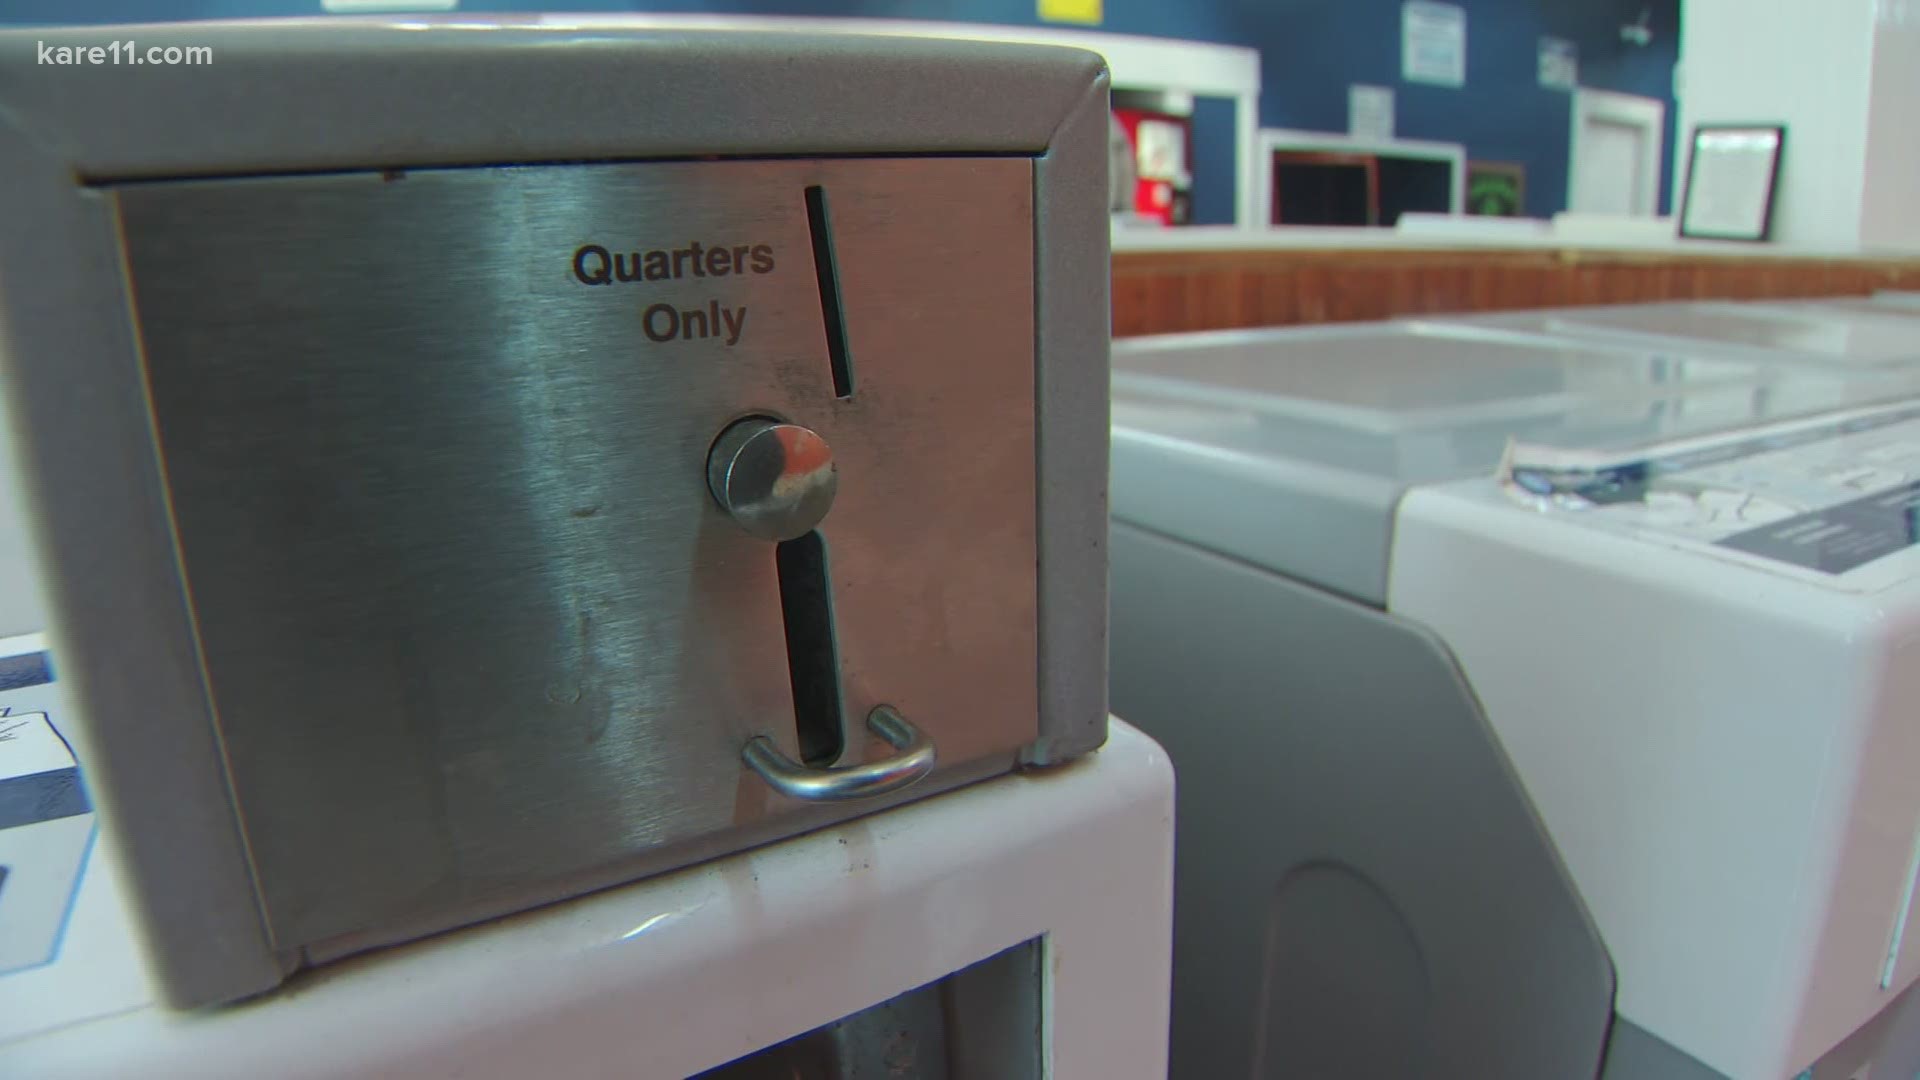 "It's been almost impossible to get quarters lately," said Jake Devney, owner of Coin Clean Laundry in Minneapolis.